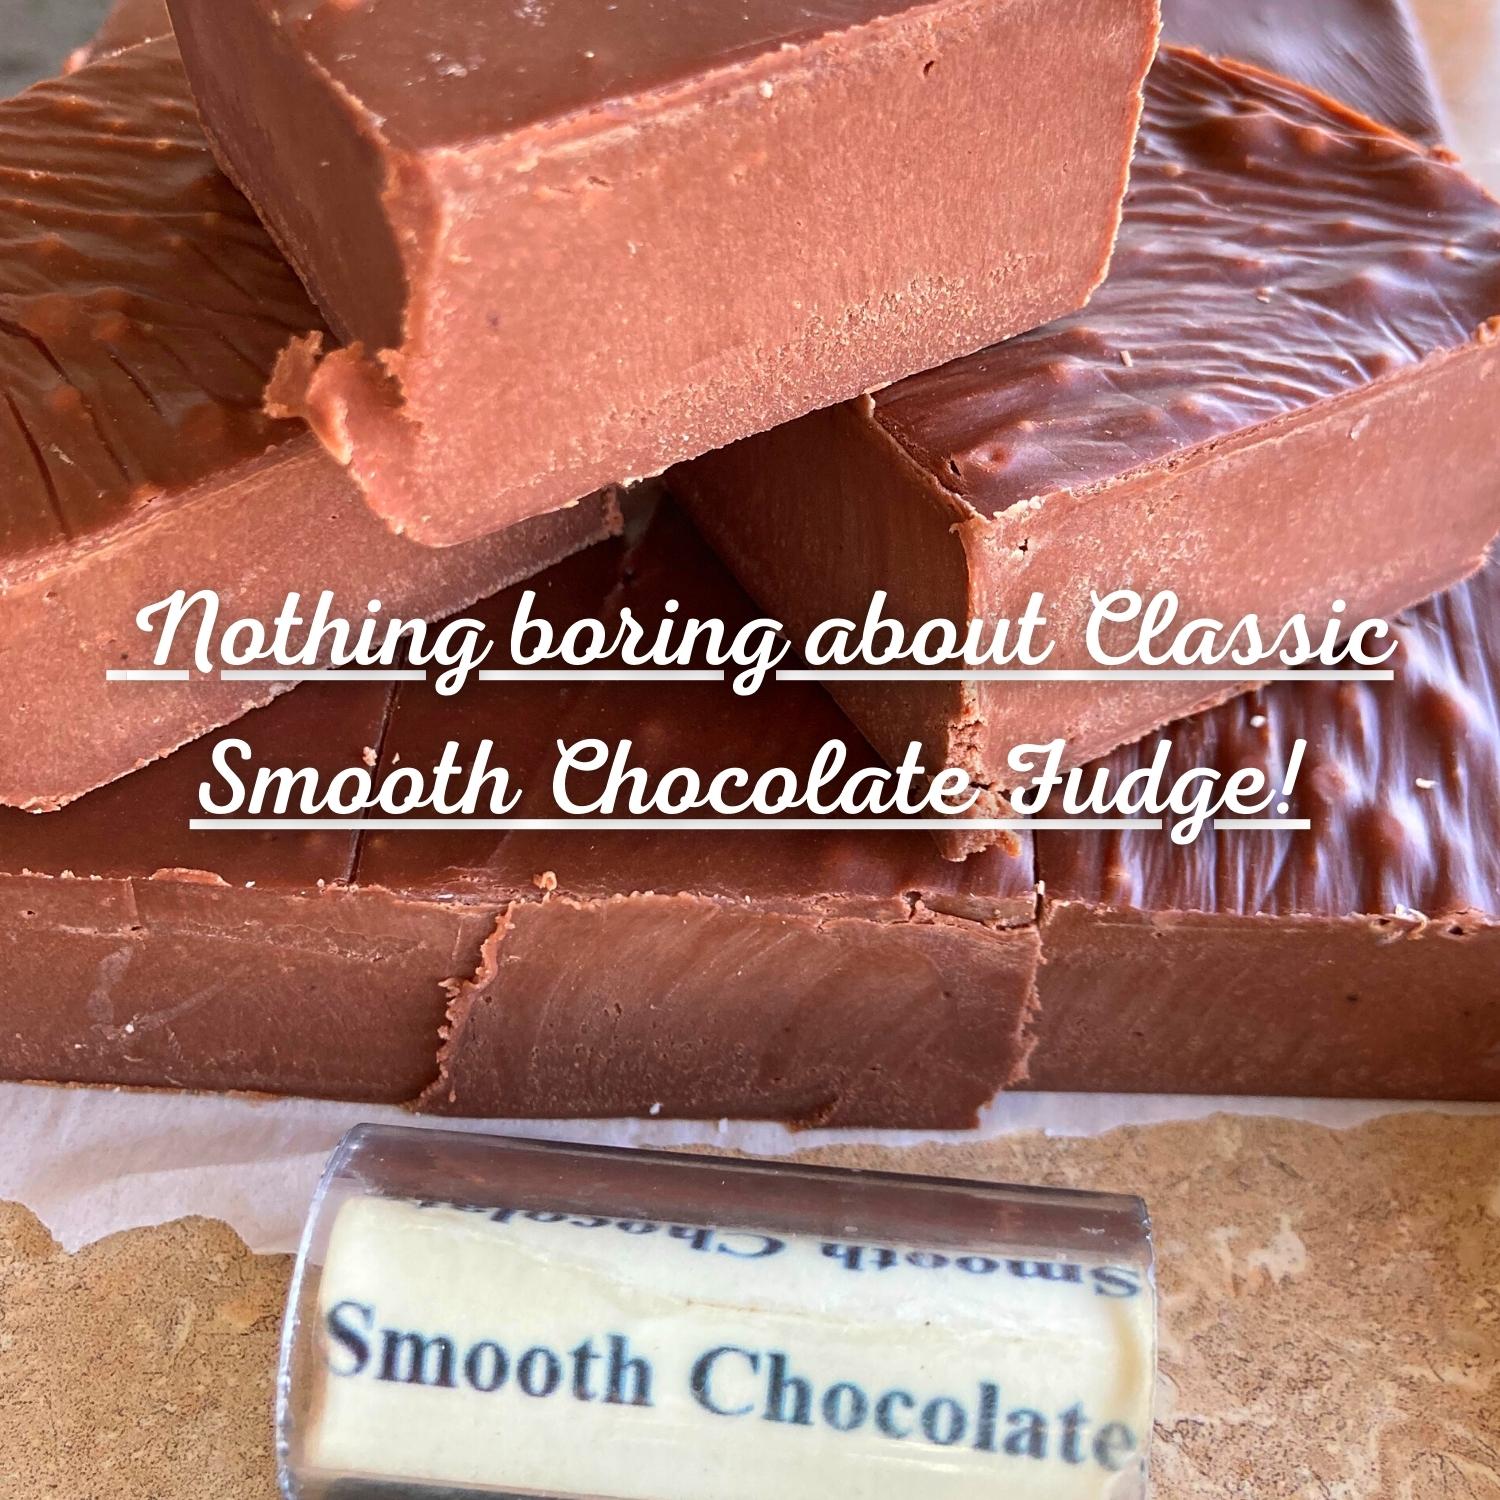 Smooth Chocolate Fudge Nothing boring about Classic Smooth Chocolate Fudge!